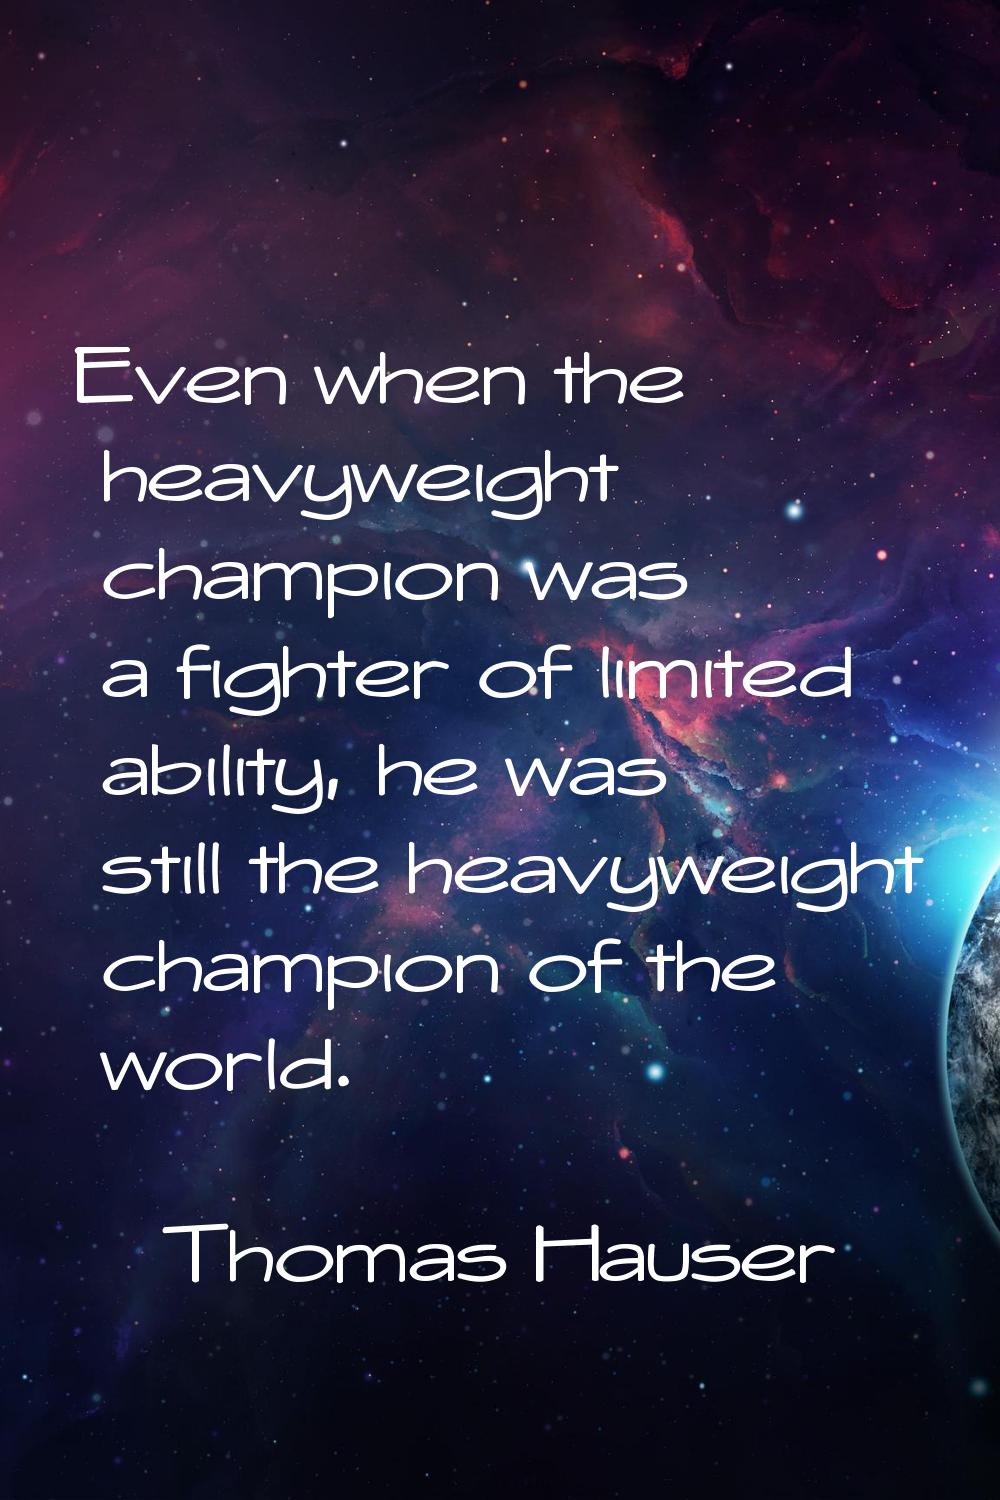 Even when the heavyweight champion was a fighter of limited ability, he was still the heavyweight c